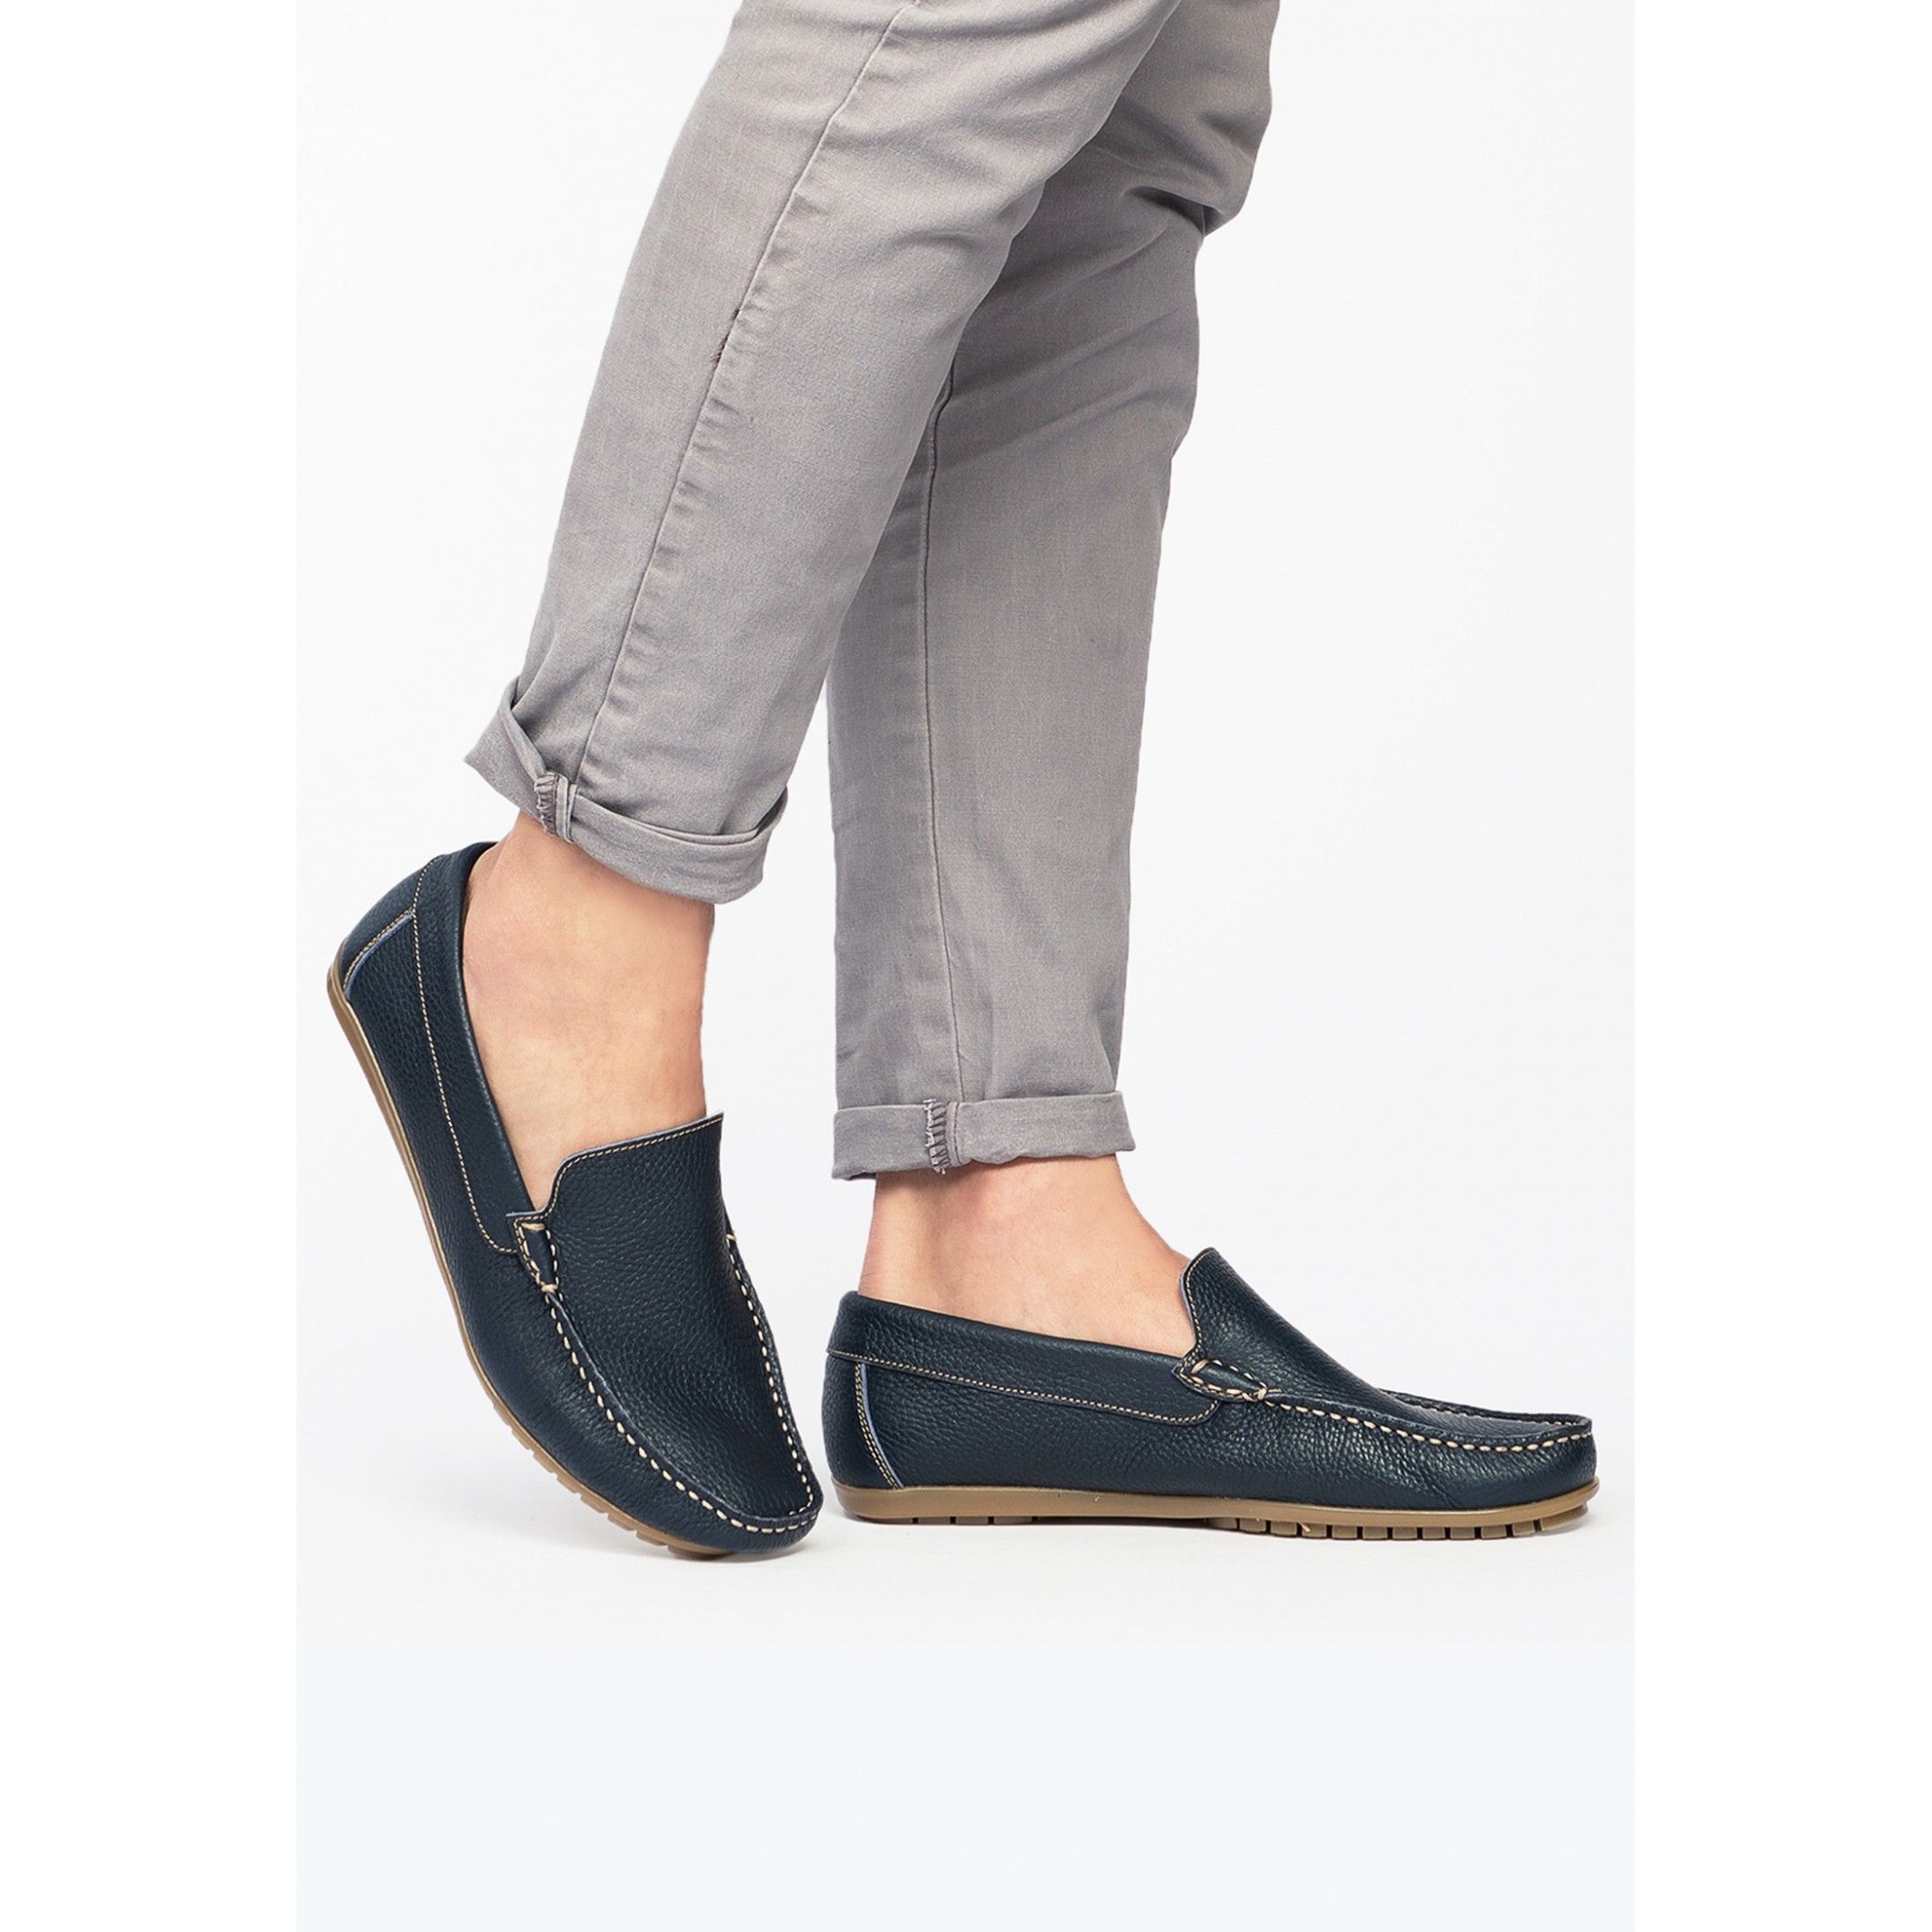 Nappa leather loafers by Son Castellanisimos. Upper made of cowhide leather. Open shoe with inner and insole made of cowhide leather. Sole material: synthetic and non slip. Heel height: 1 cm. Designed and made in Spain.